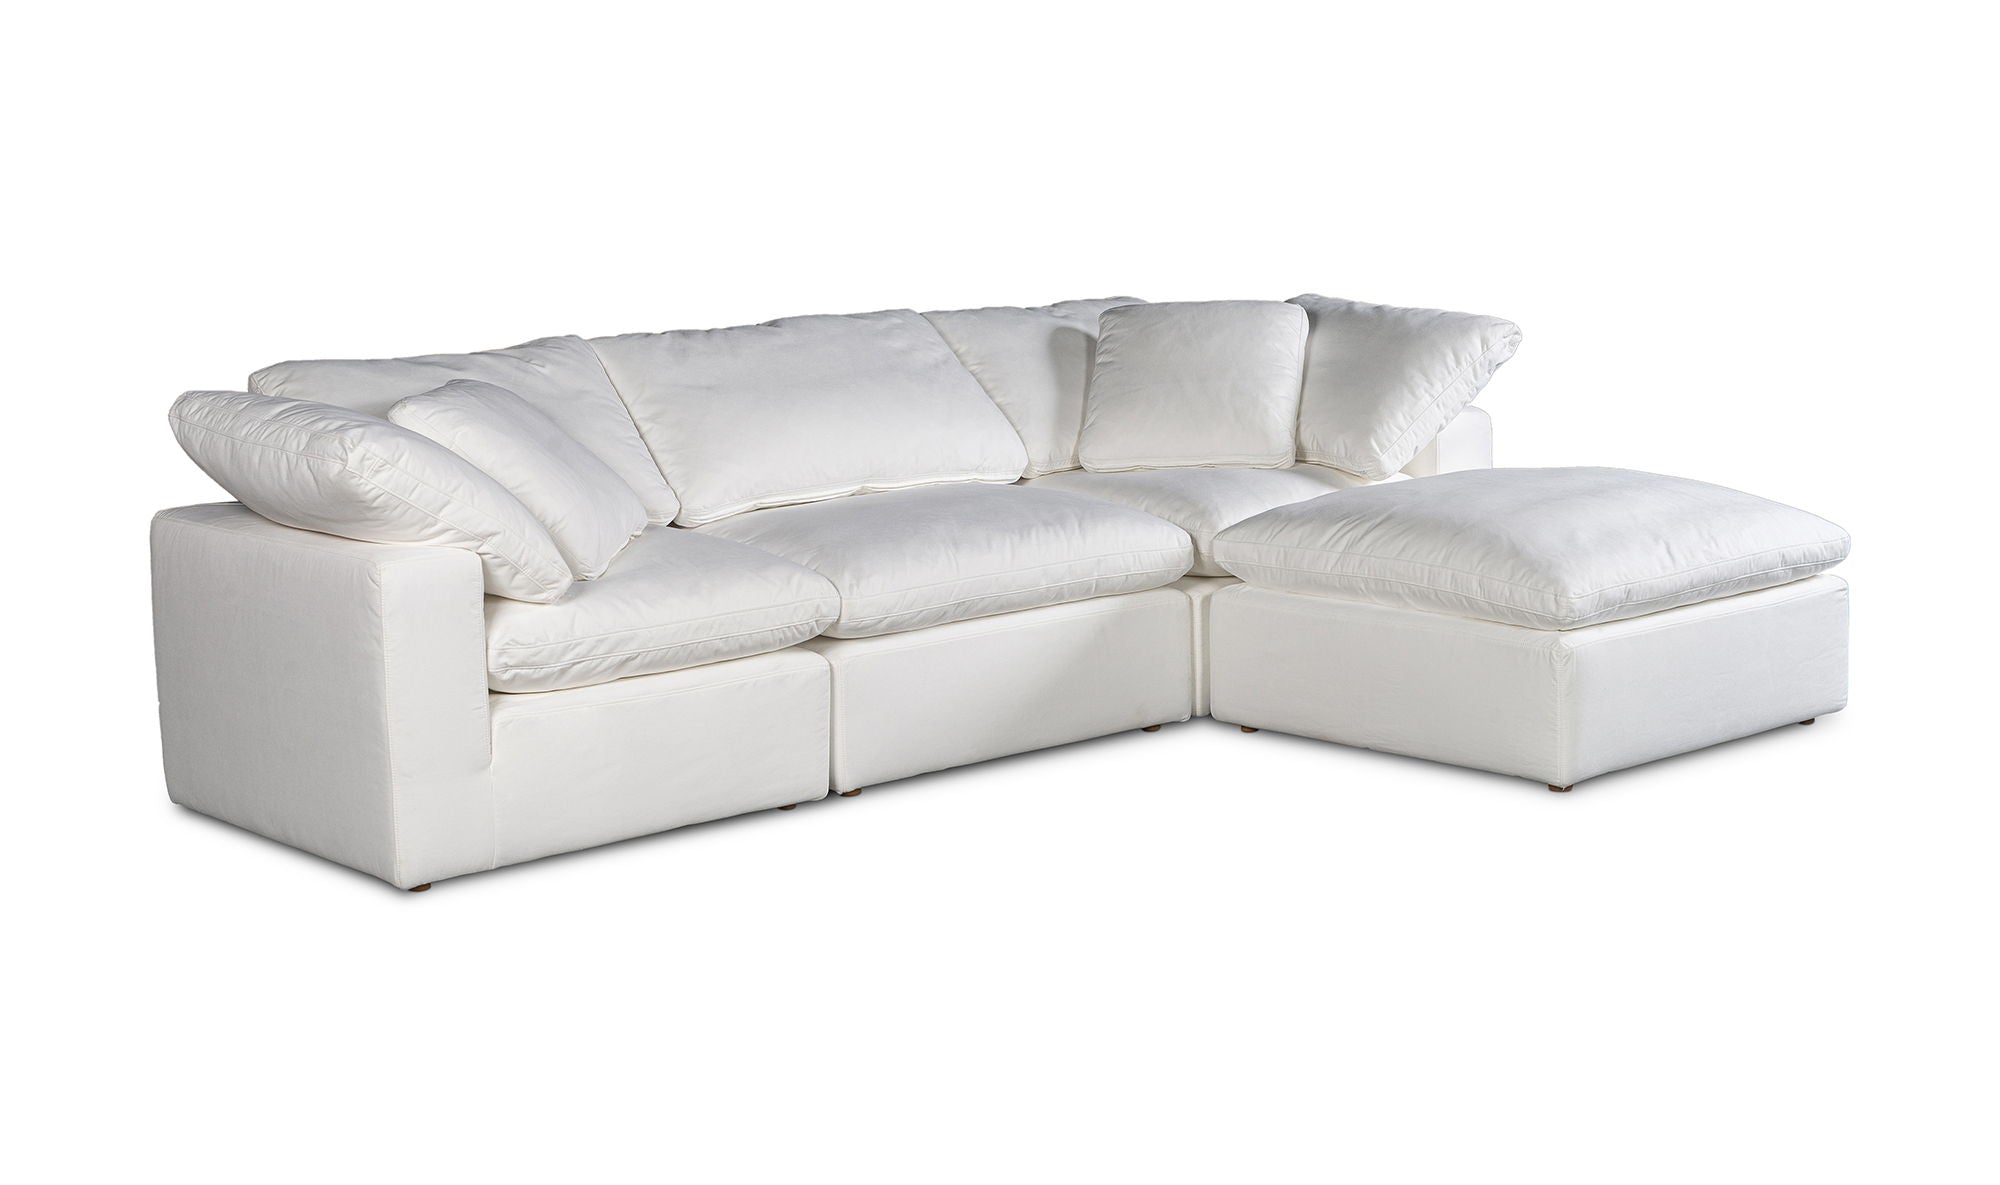 Clay Lounge Modular Sectional - LiveSmart Fabric - Cream White - Comfortable and Stylish Living Room Furniture-Stationary Sectionals-American Furniture Outlet